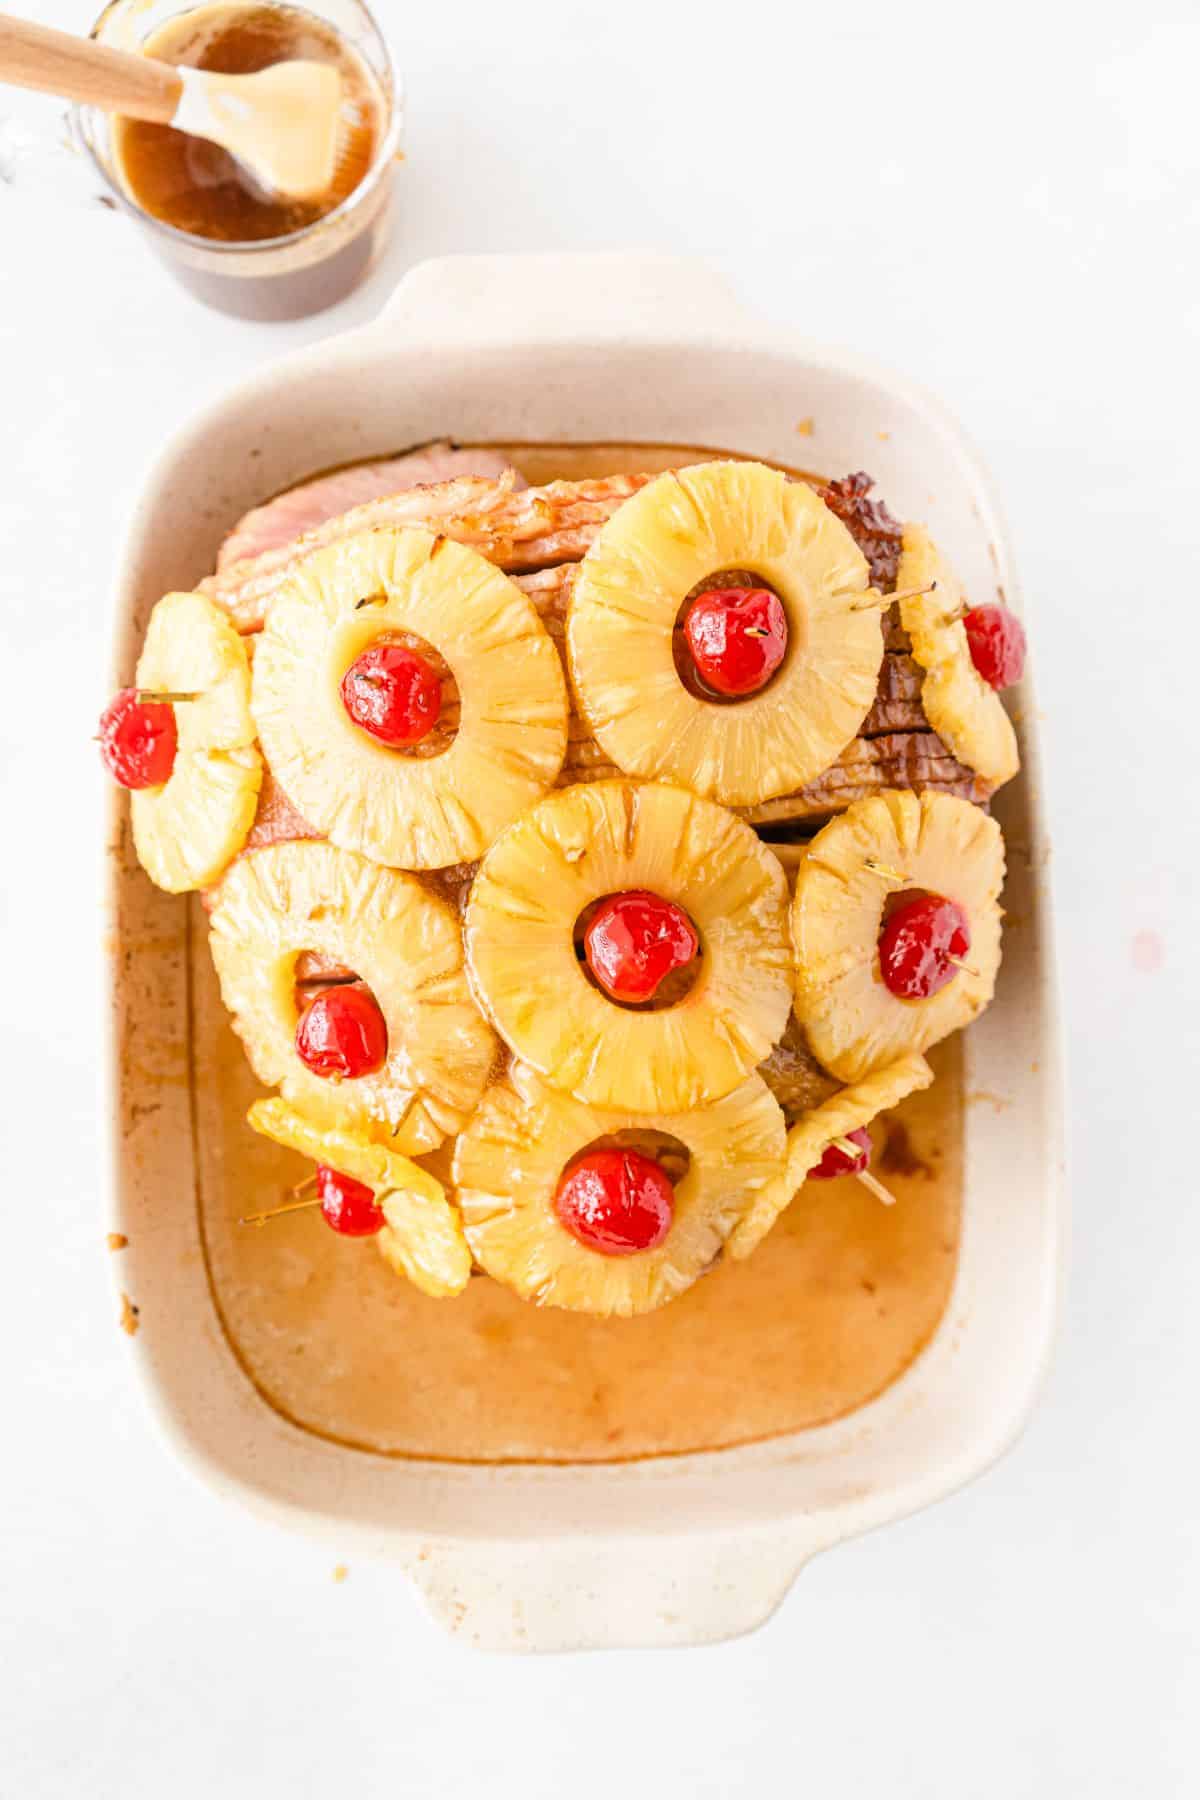 Baked ham with cherries and pineapples in a baking dish. marinade and brush on the side.